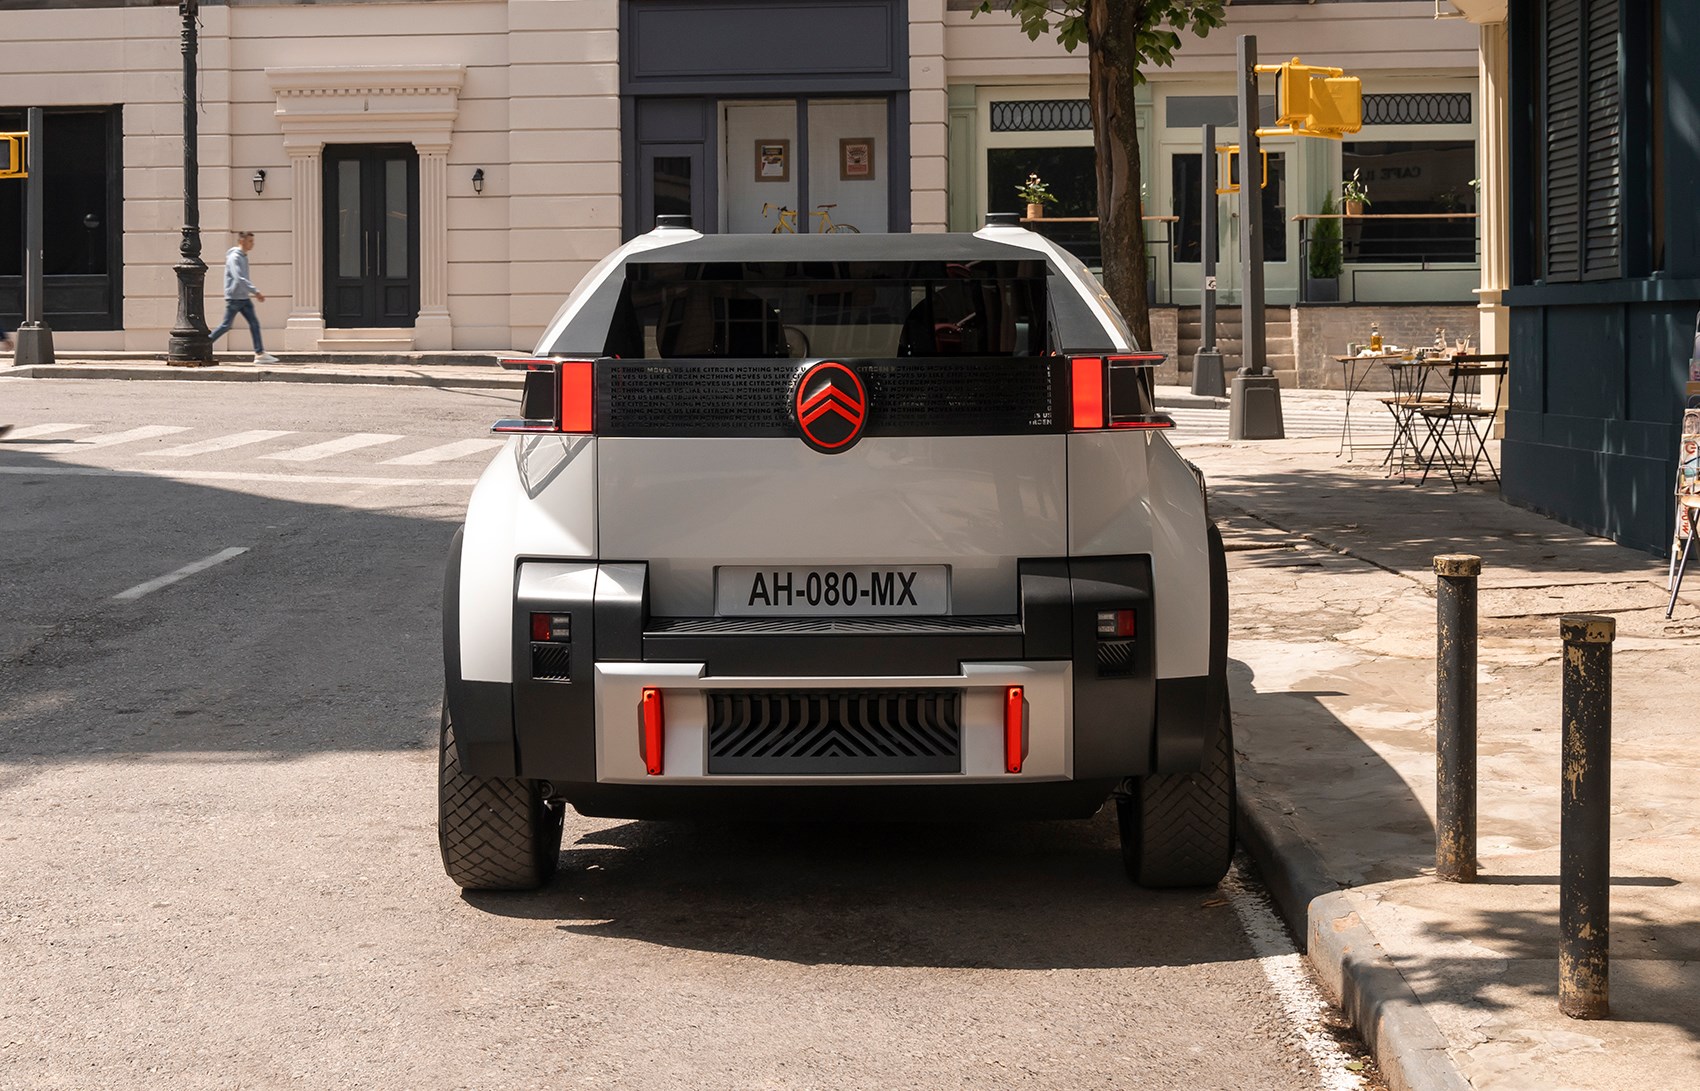 Citroen's Oli concept electric car made of recyclable materials